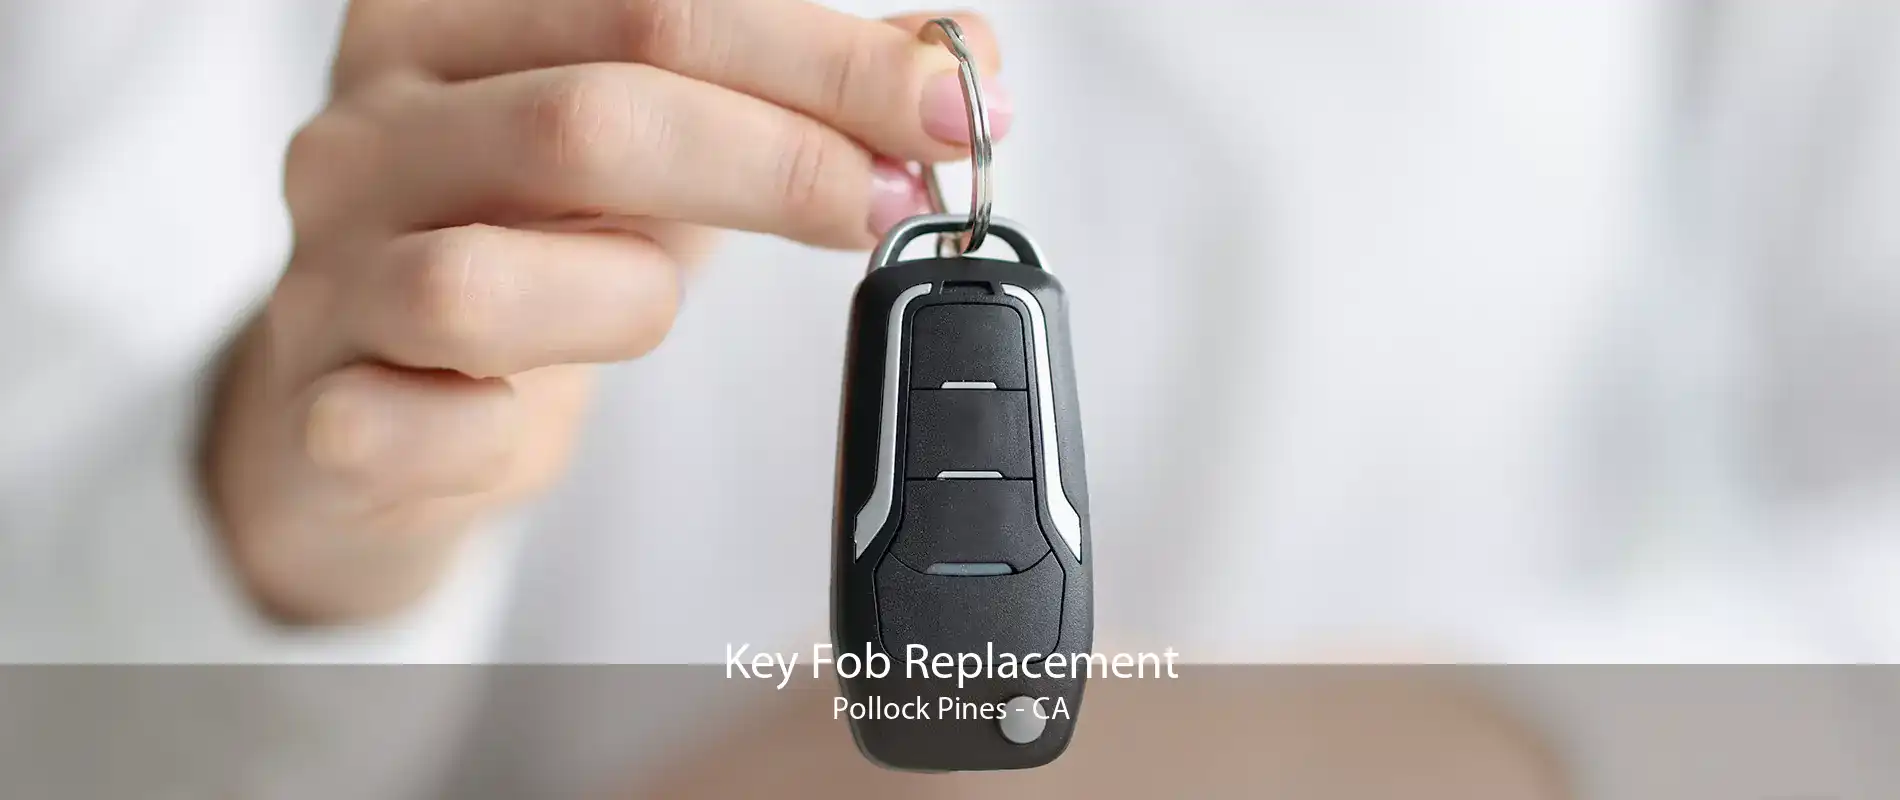 Key Fob Replacement Pollock Pines - CA